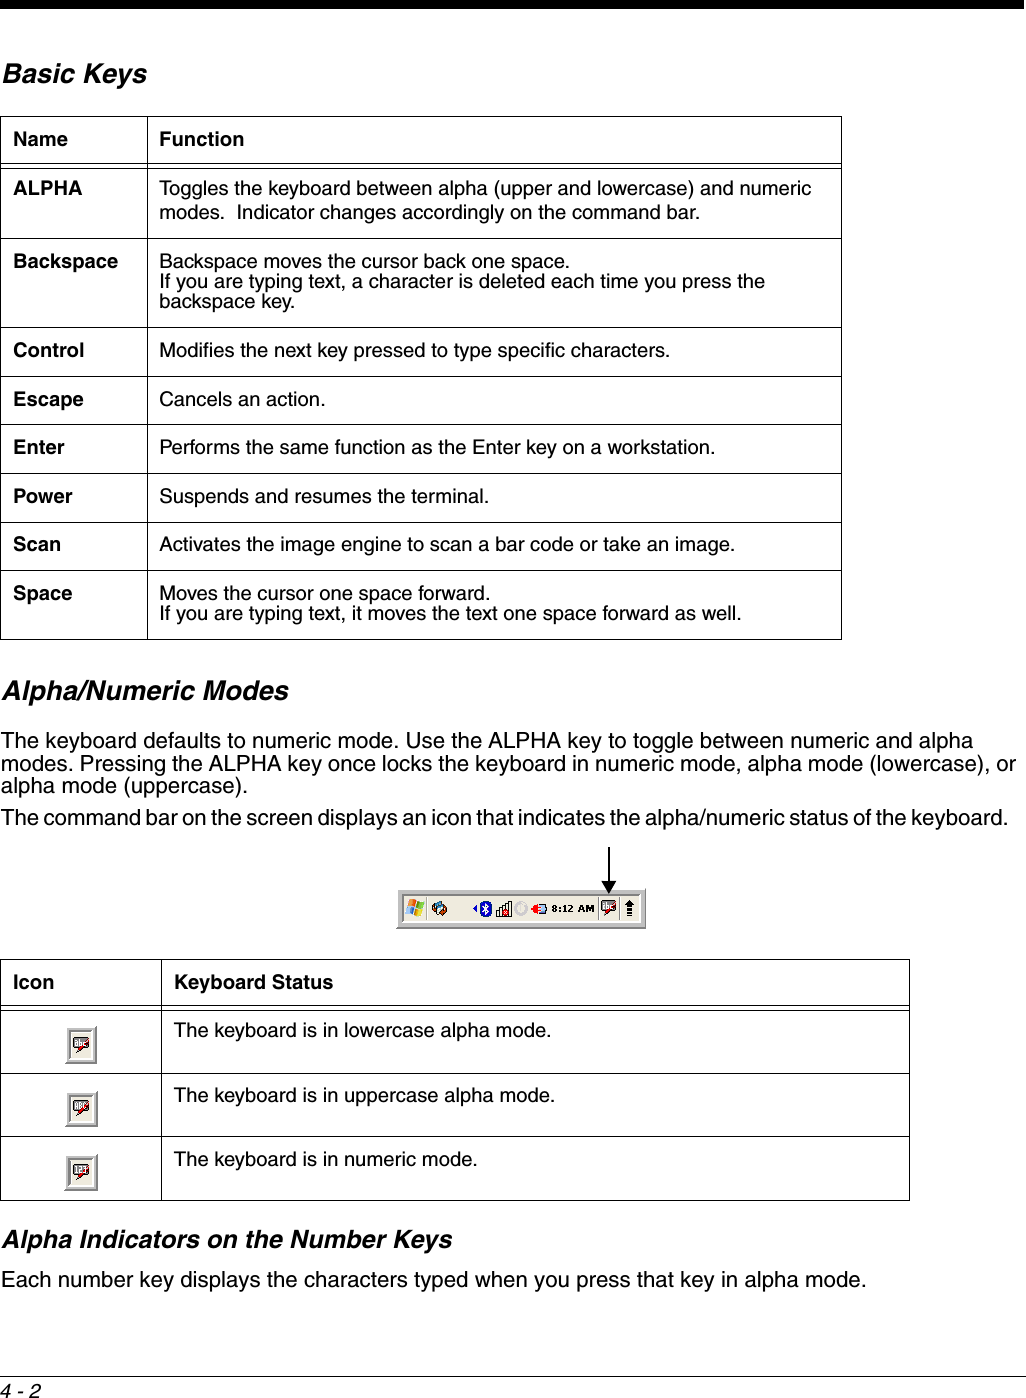 4 - 2Basic KeysAlpha/Numeric ModesThe keyboard defaults to numeric mode. Use the ALPHA key to toggle between numeric and alpha modes. Pressing the ALPHA key once locks the keyboard in numeric mode, alpha mode (lowercase), or alpha mode (uppercase).The command bar on the screen displays an icon that indicates the alpha/numeric status of the keyboard.   Alpha Indicators on the Number KeysEach number key displays the characters typed when you press that key in alpha mode. Name FunctionALPHA Toggles the keyboard between alpha (upper and lowercase) and numeric modes.  Indicator changes accordingly on the command bar.Backspace Backspace moves the cursor back one space. If you are typing text, a character is deleted each time you press the backspace key.Control Modifies the next key pressed to type specific characters.Escape Cancels an action.Enter Performs the same function as the Enter key on a workstation.Power Suspends and resumes the terminal.Scan Activates the image engine to scan a bar code or take an image.Space Moves the cursor one space forward.If you are typing text, it moves the text one space forward as well. Icon Keyboard StatusThe keyboard is in lowercase alpha mode.The keyboard is in uppercase alpha mode.The keyboard is in numeric mode.